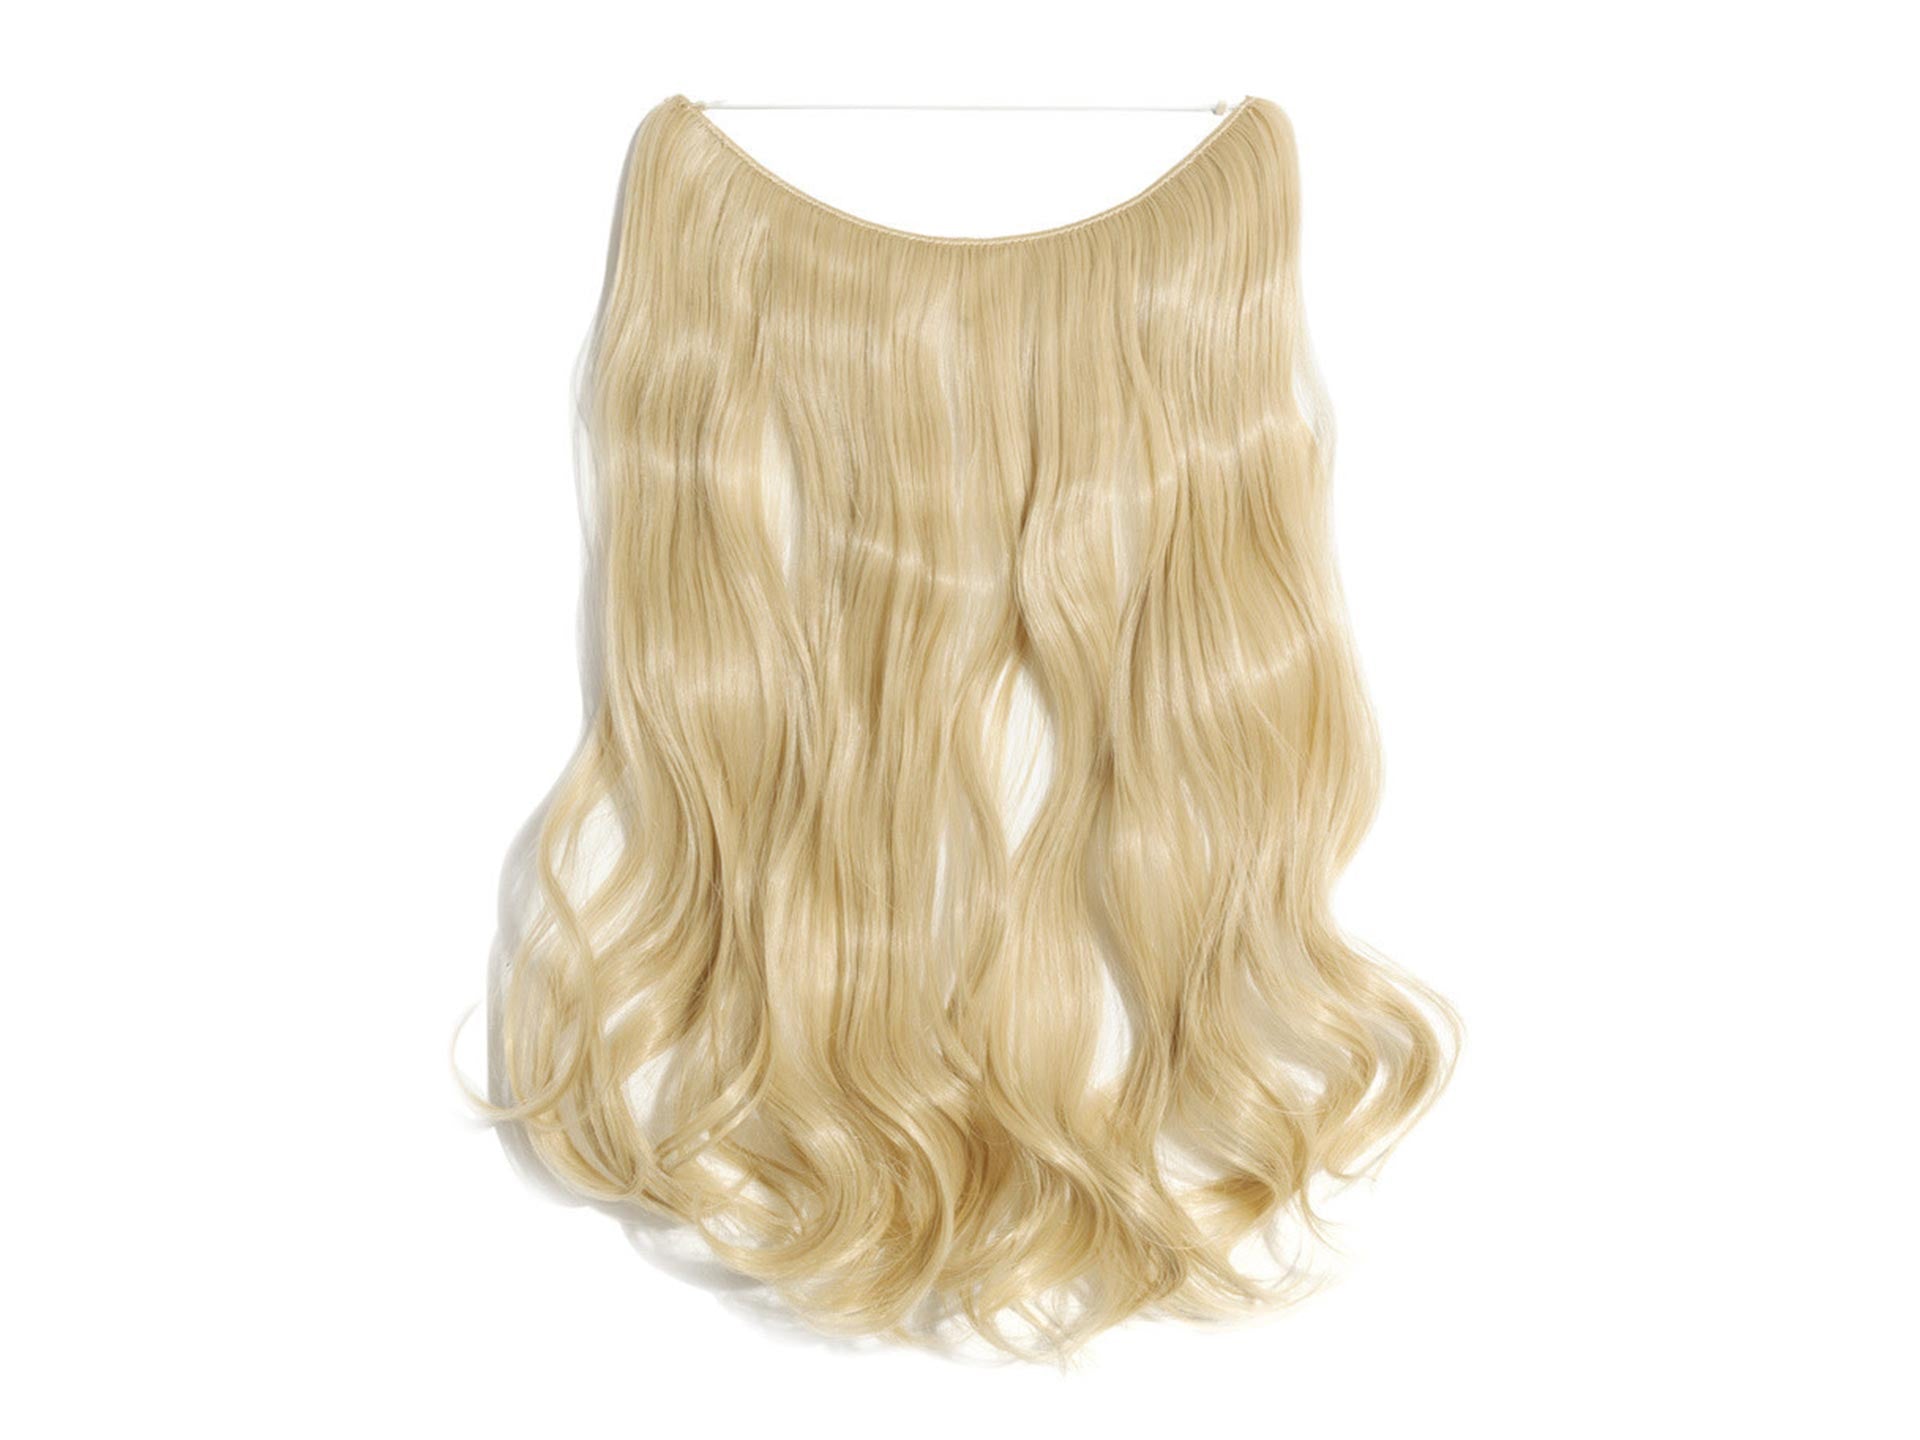 7. Blonde Halo Hair Extensions - wide 5